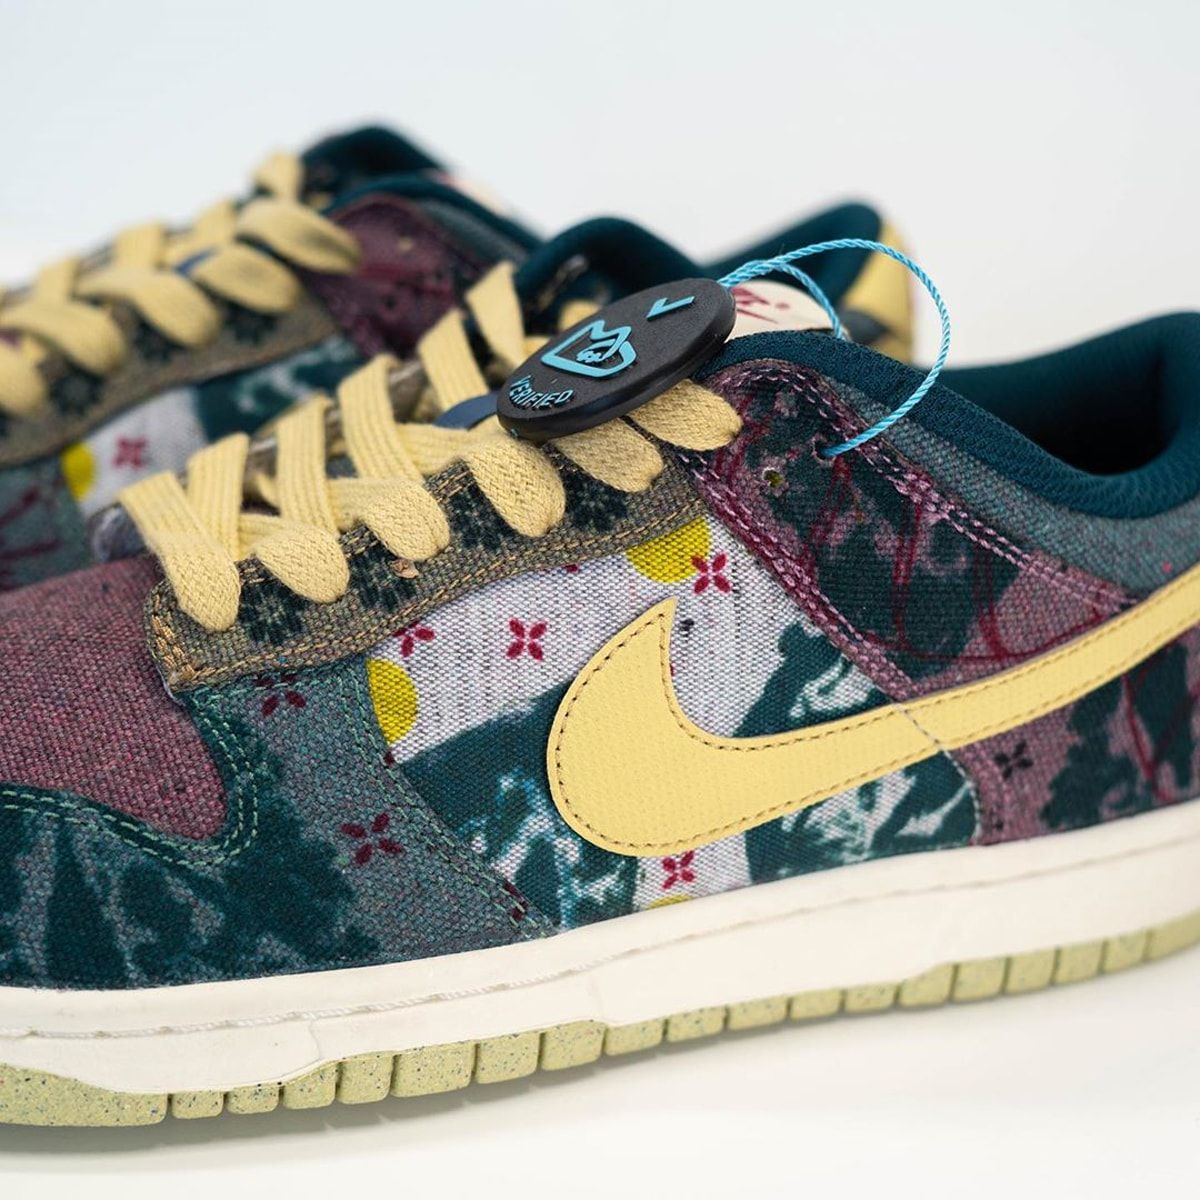 Where to Buy the Nike Dunk Low “Lemon Wash” | House of Heat°